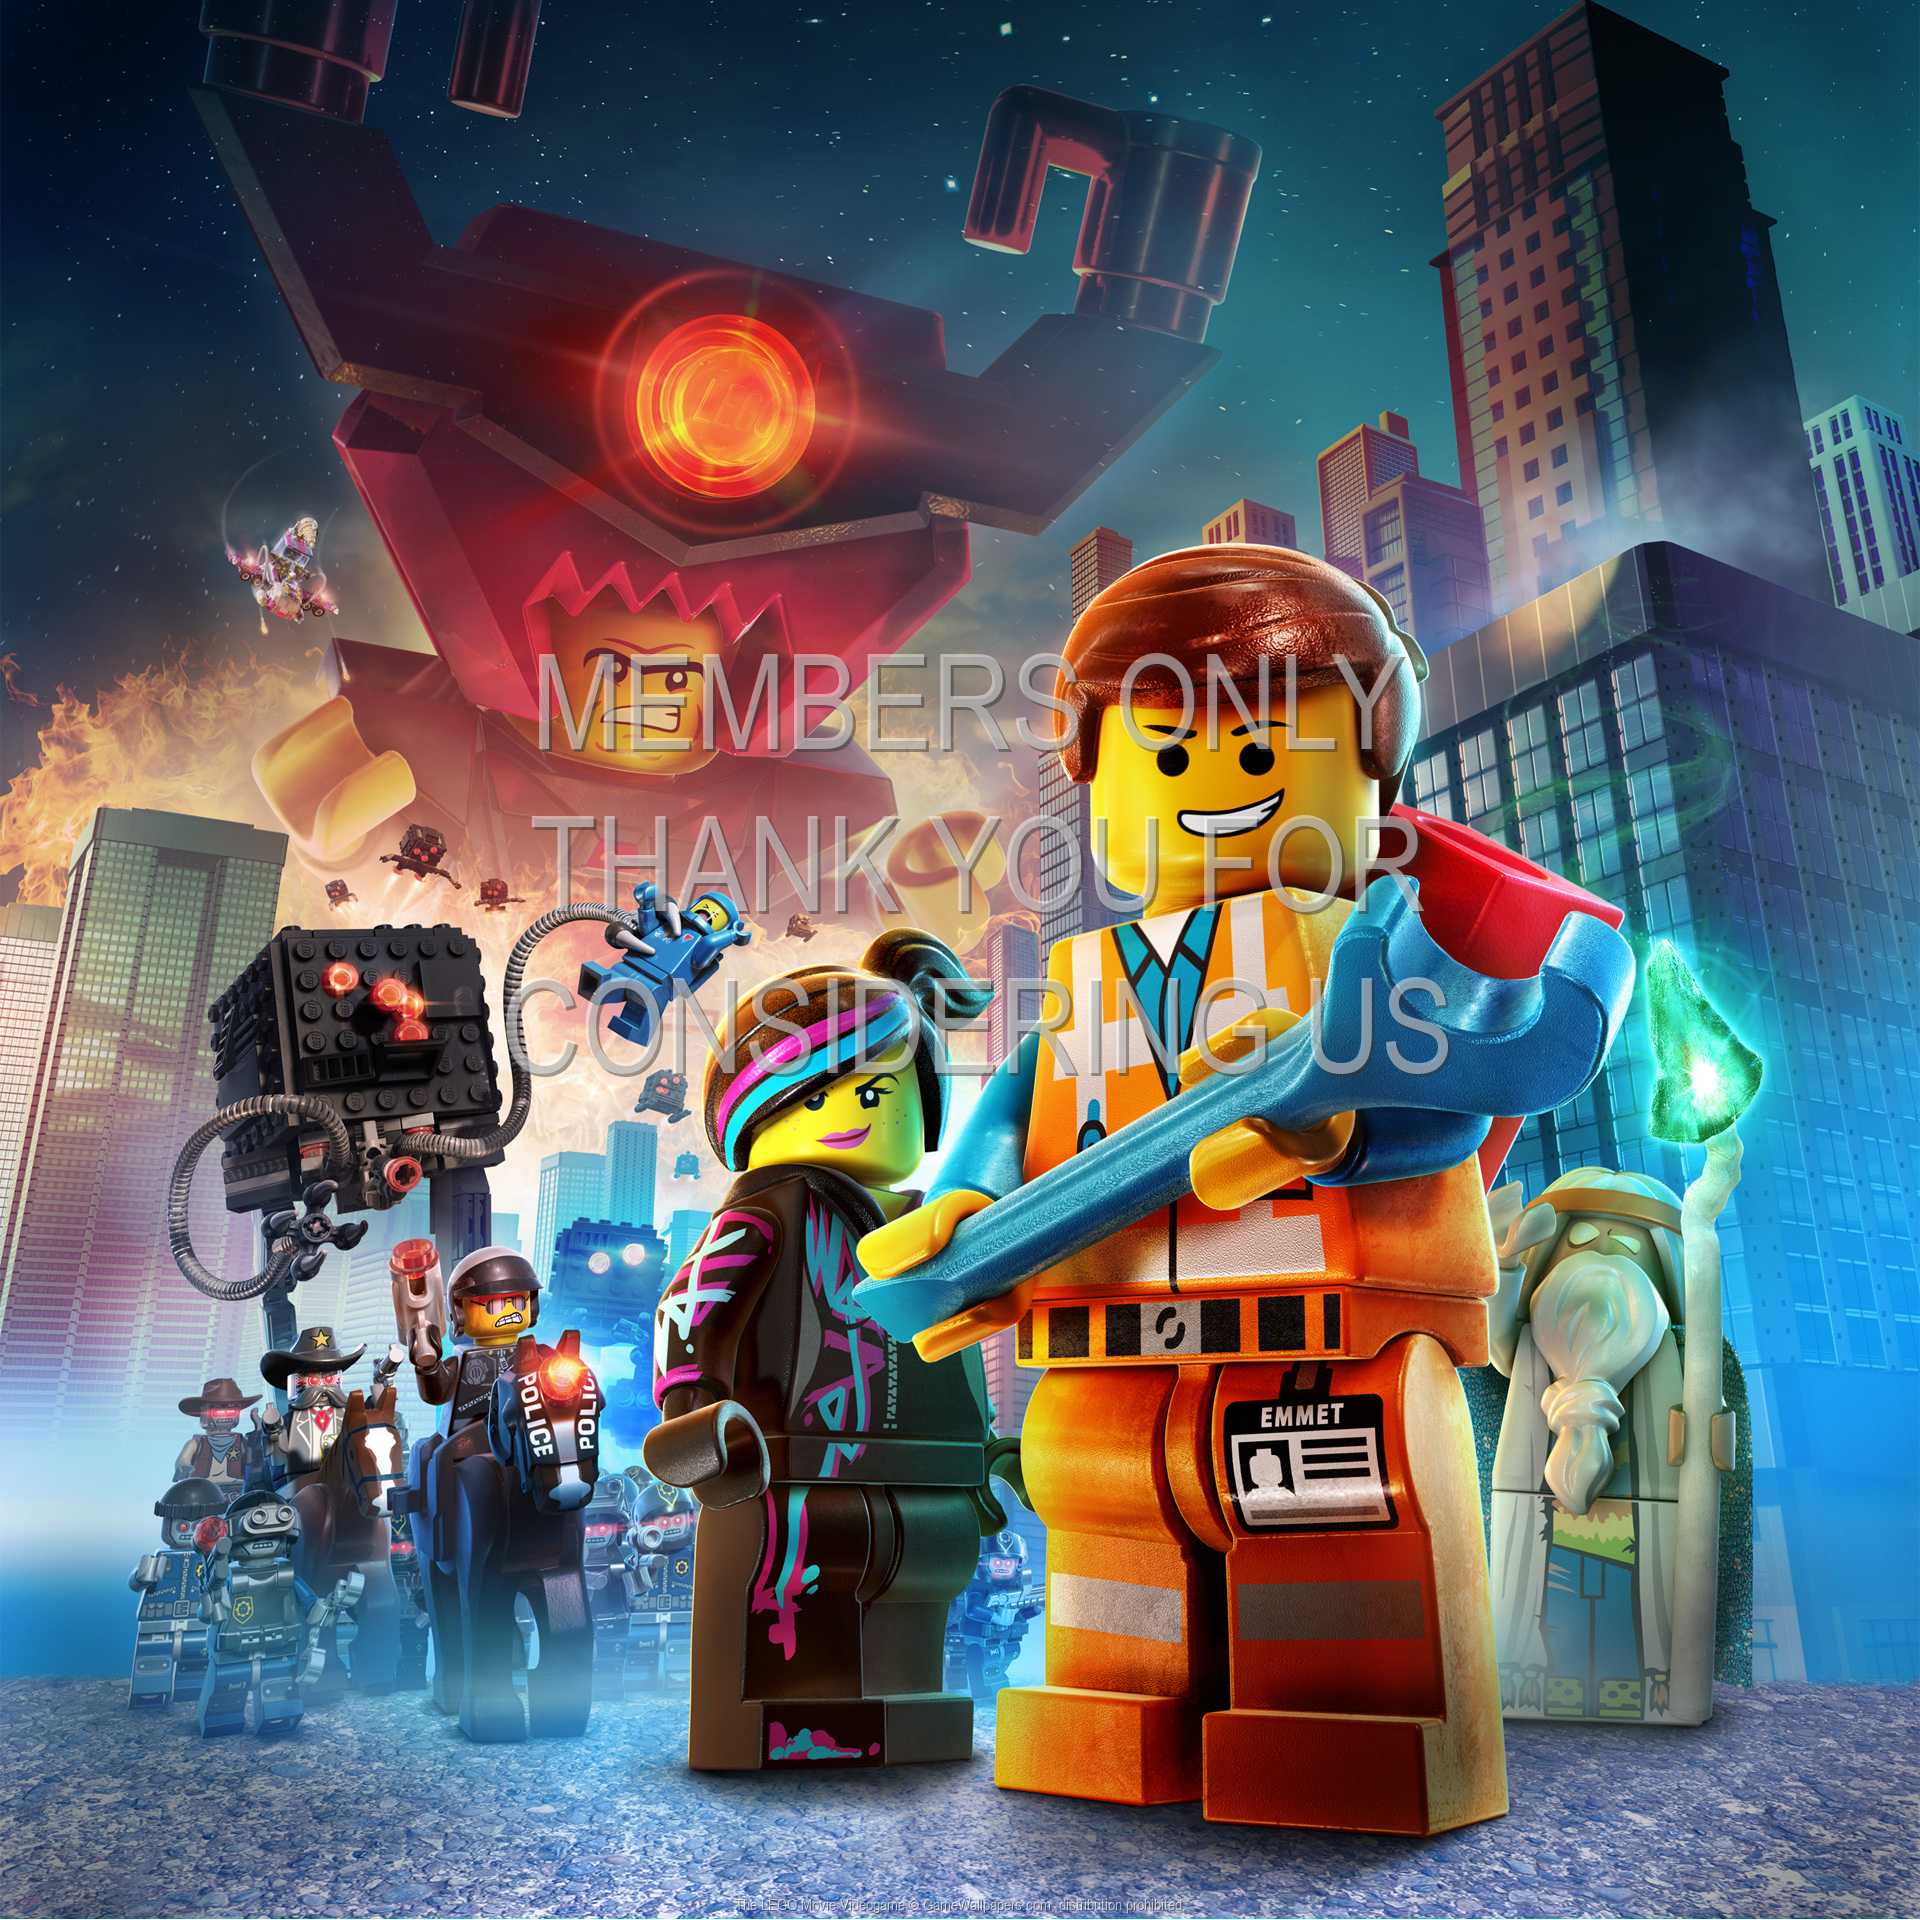 The LEGO Movie Videogame 1080p%20Horizontal Mobile wallpaper or background 01